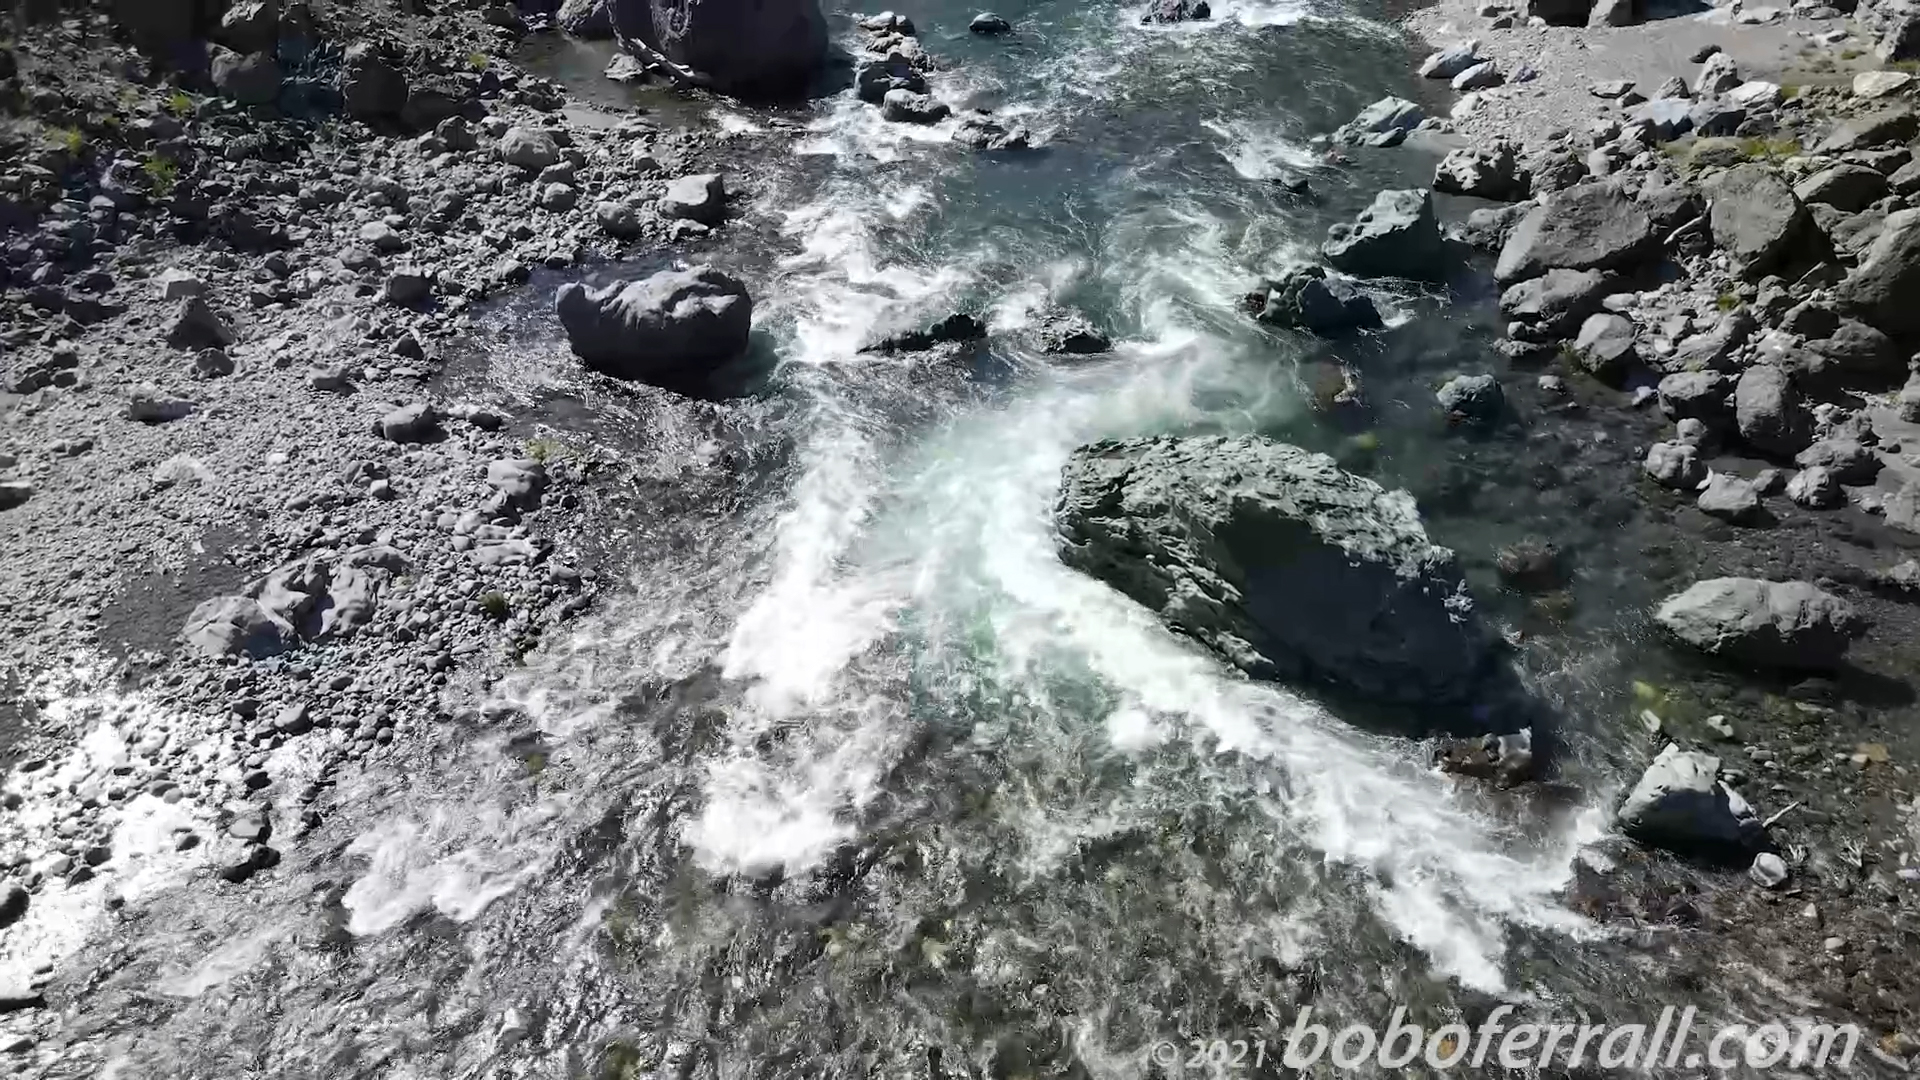 Flying The Middle Fork Eel River Above Swallow Rock to Dos Rios Bridge - April 2021